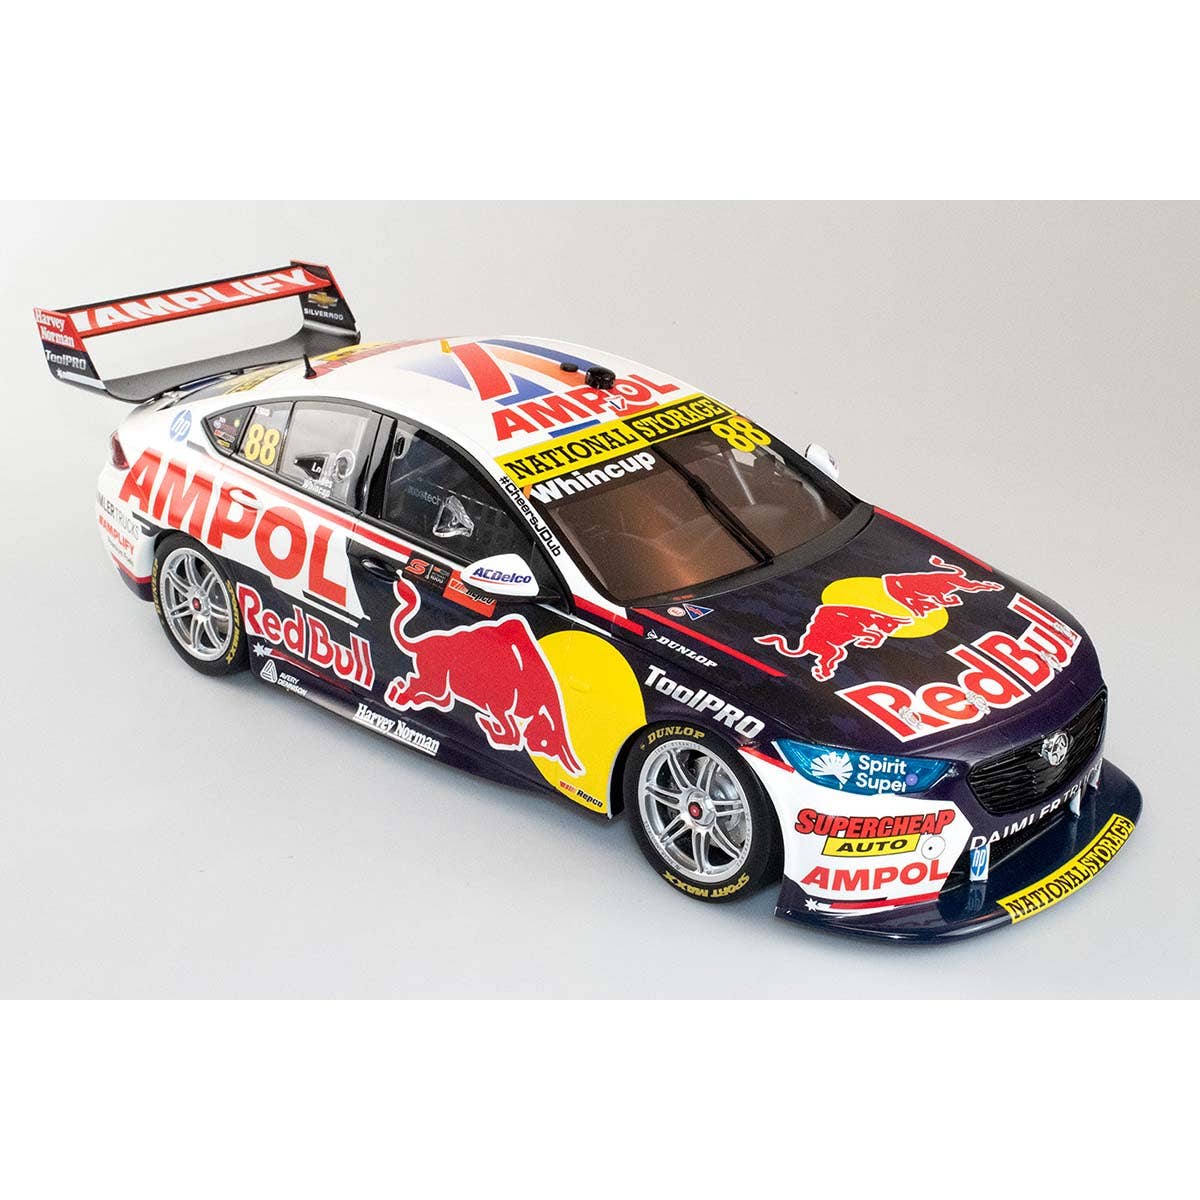 HOLDEN ZB COMMODORE - RED BULL AMPOL RACING - WHINCUP/LOWNDES #88 - REPCO Bathurst 1000 - 1:12 Scale Resin Model Car